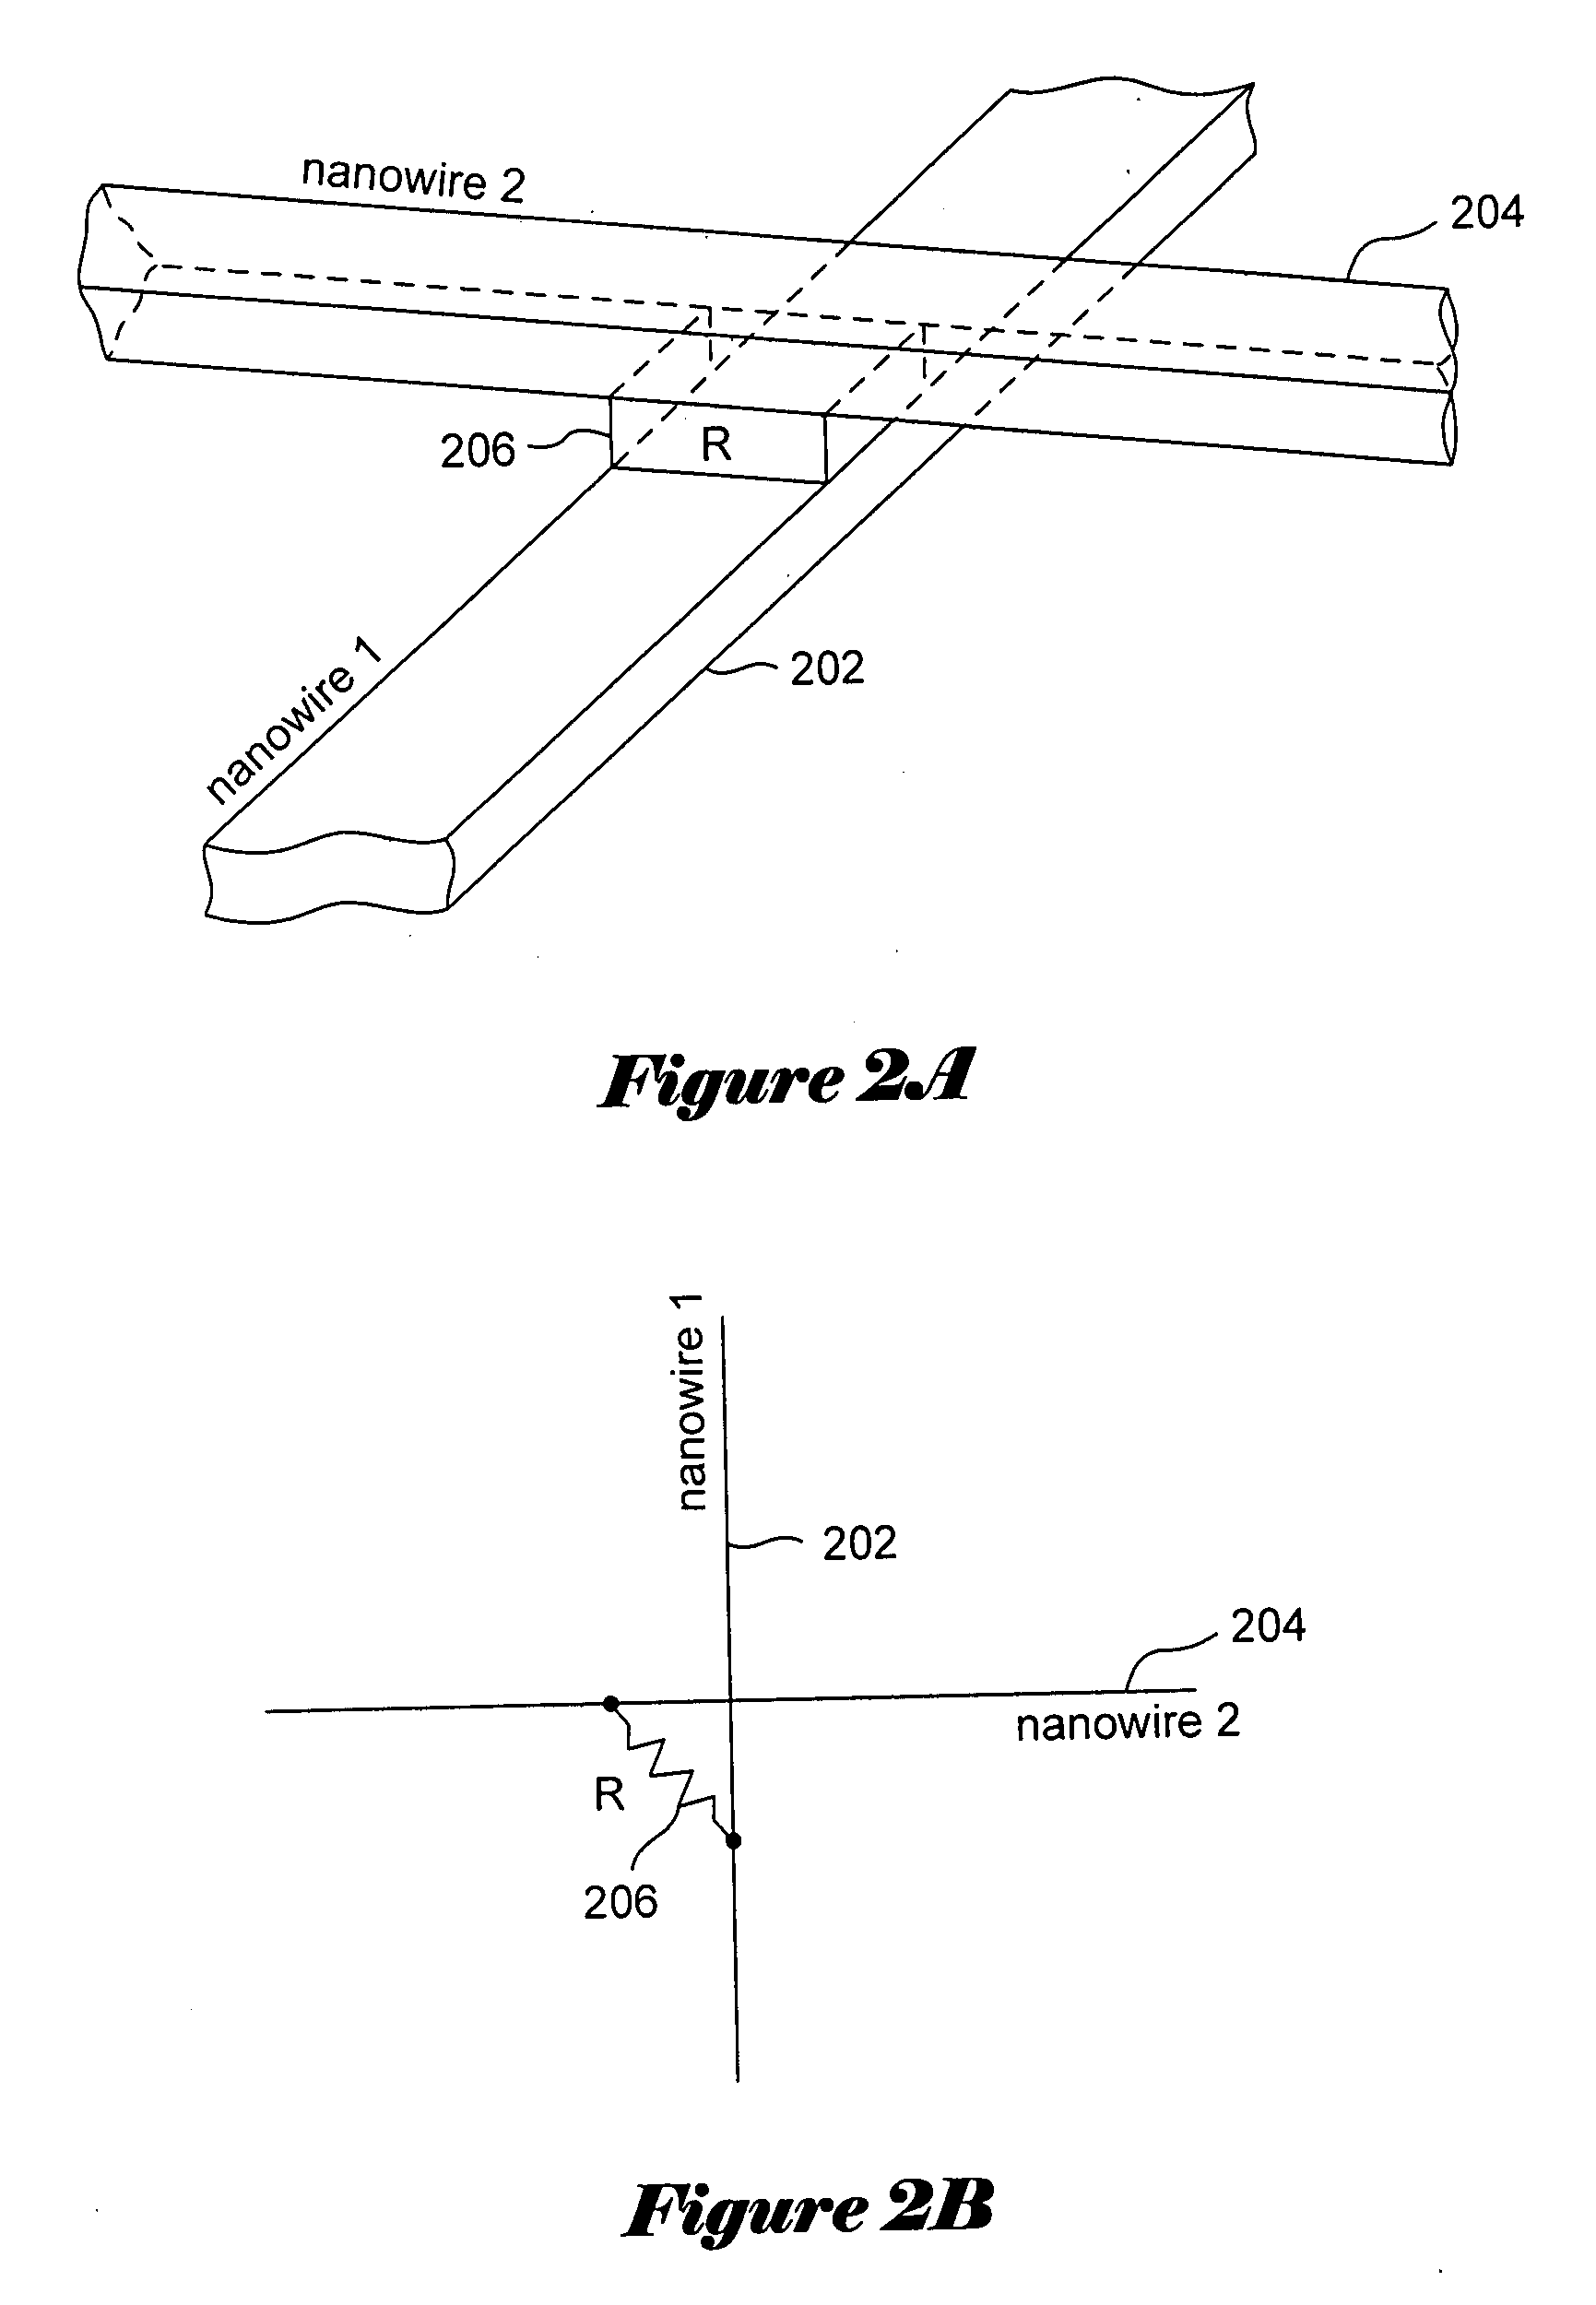 Crossbar-memory systems and methods for writing to and reading from crossbar memory junctions of crossbar-memory systems